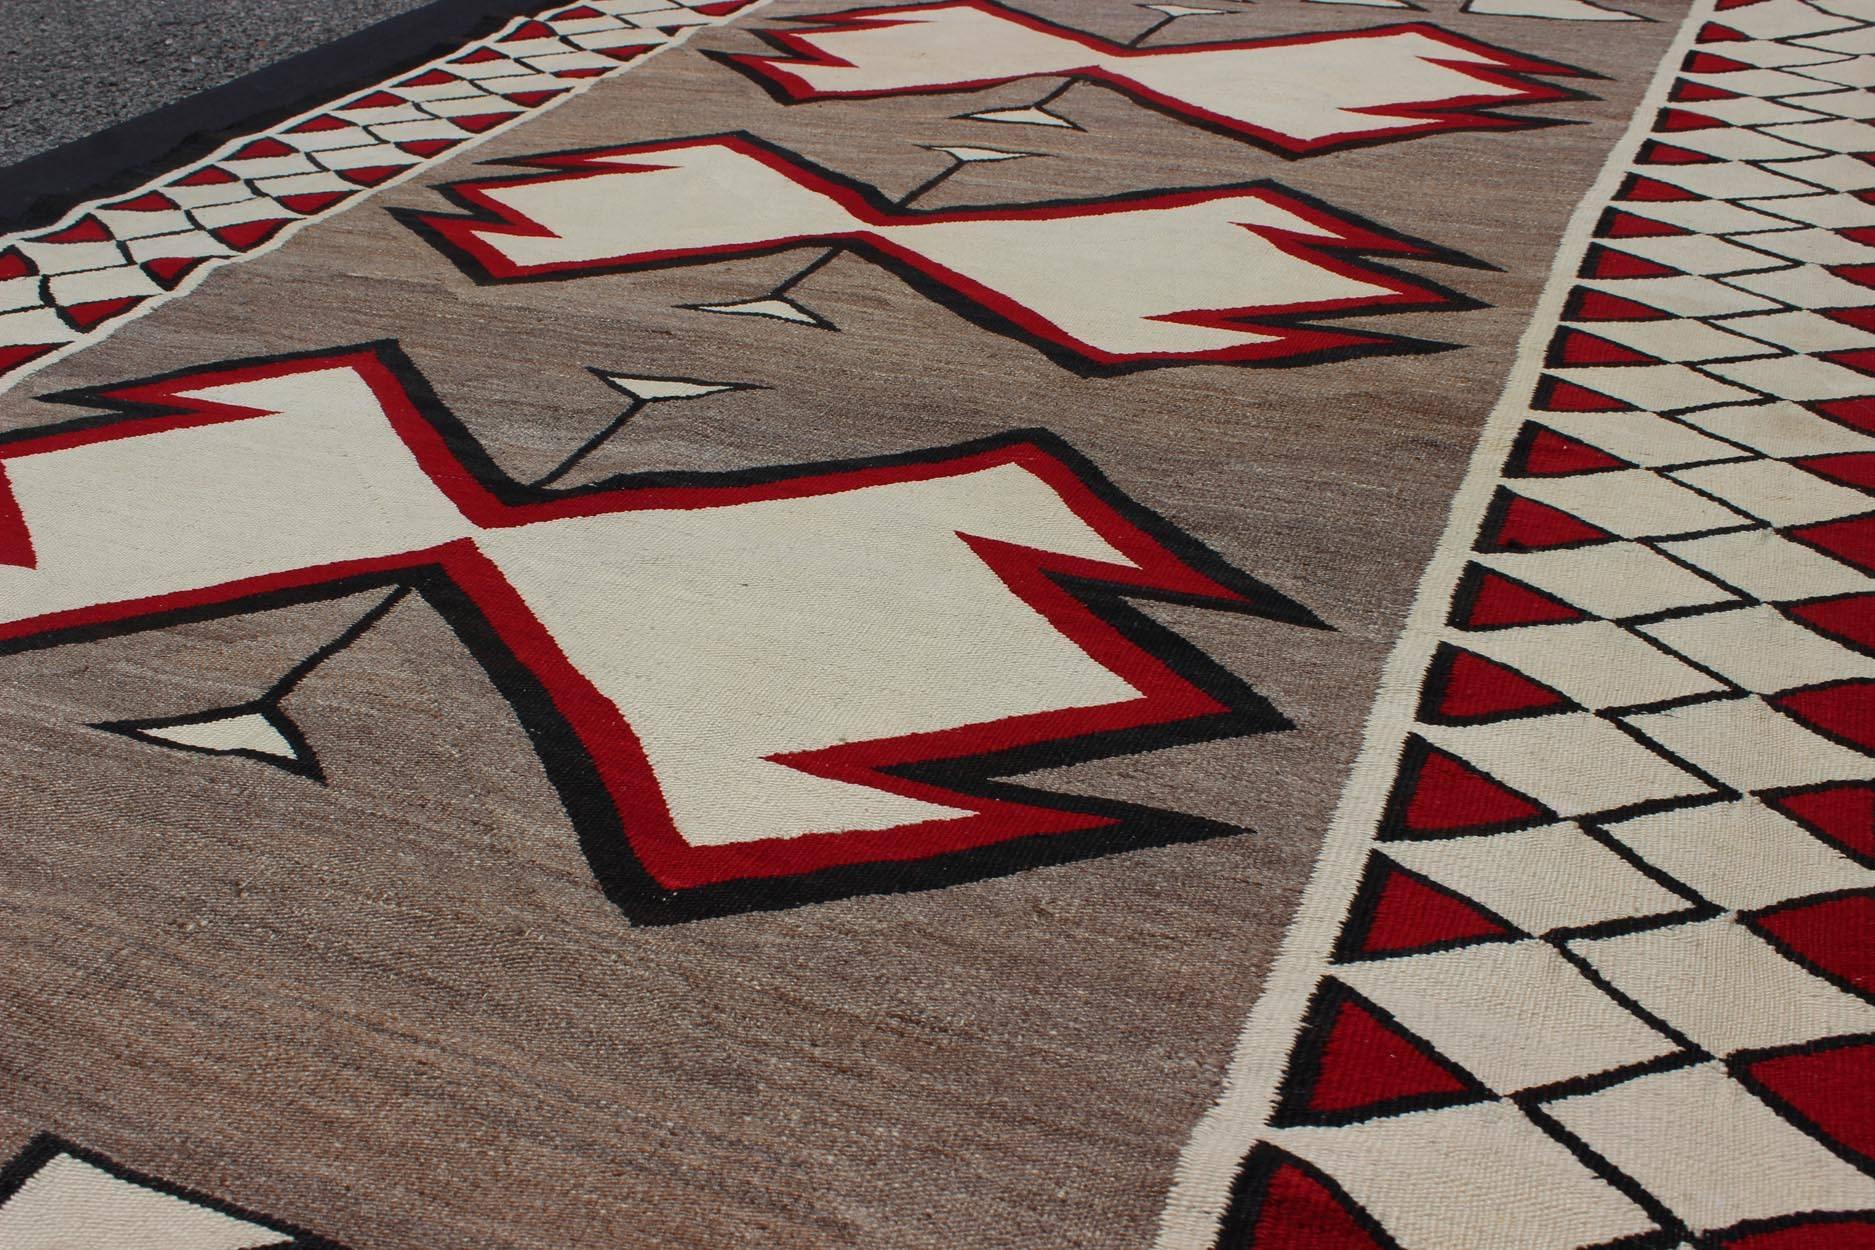 Antique Ganado Navajo Rug With Geometric Design in Red, Black, Ivory and Gray In Good Condition For Sale In Atlanta, GA